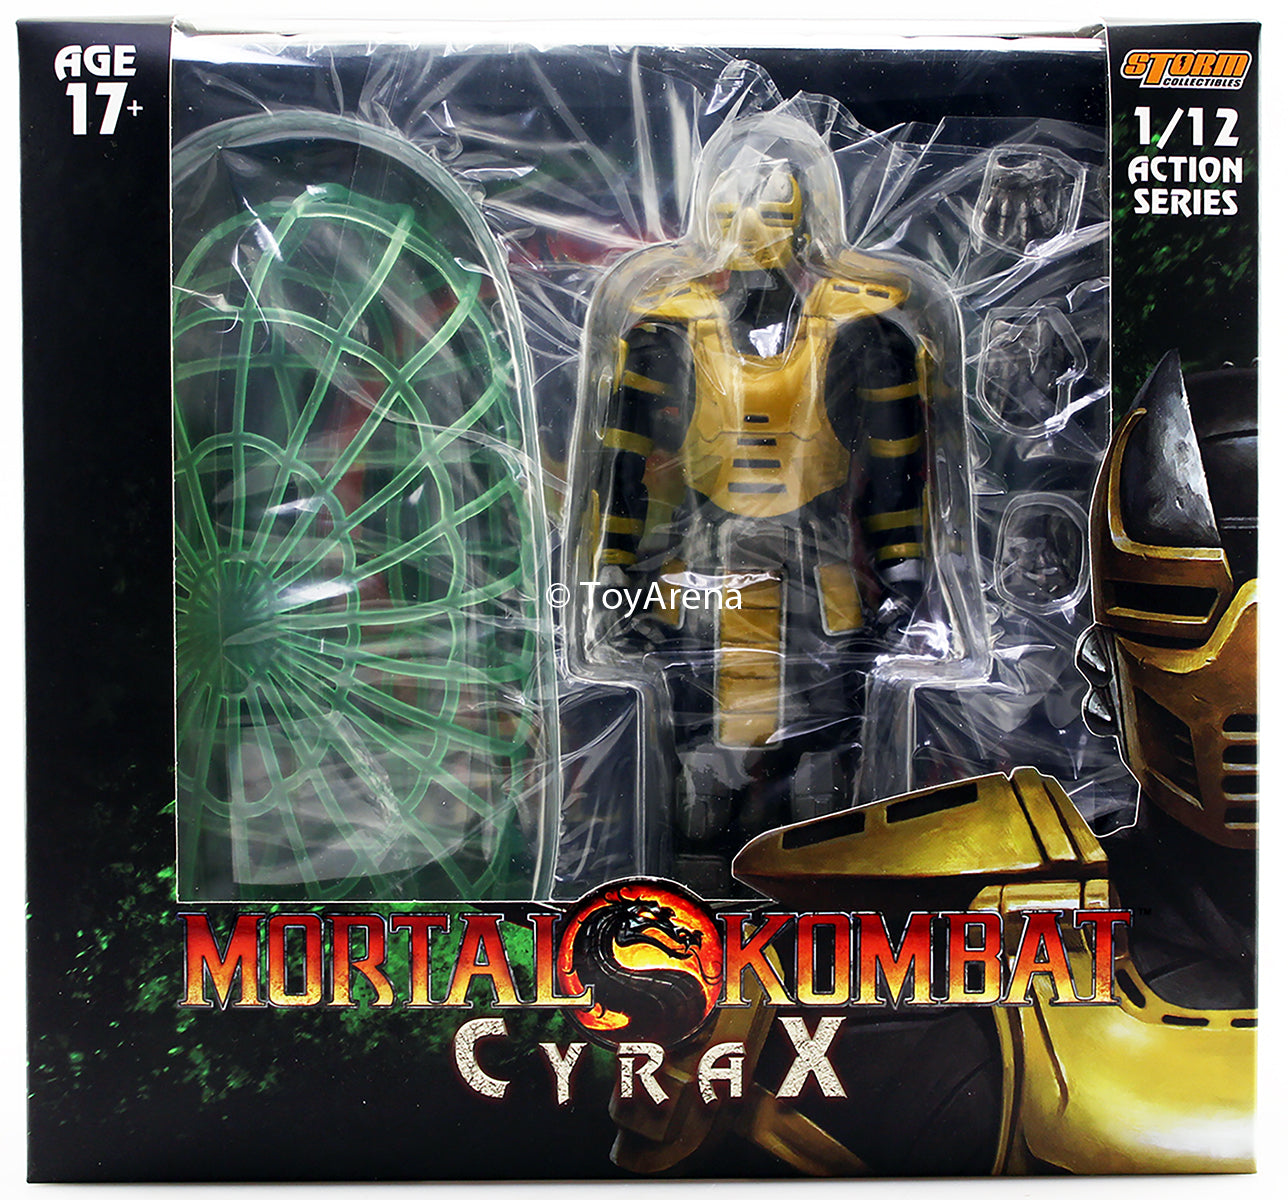 Storm Collectibles 1/12 Mortal Kombat Cyrax Scale Action Figure